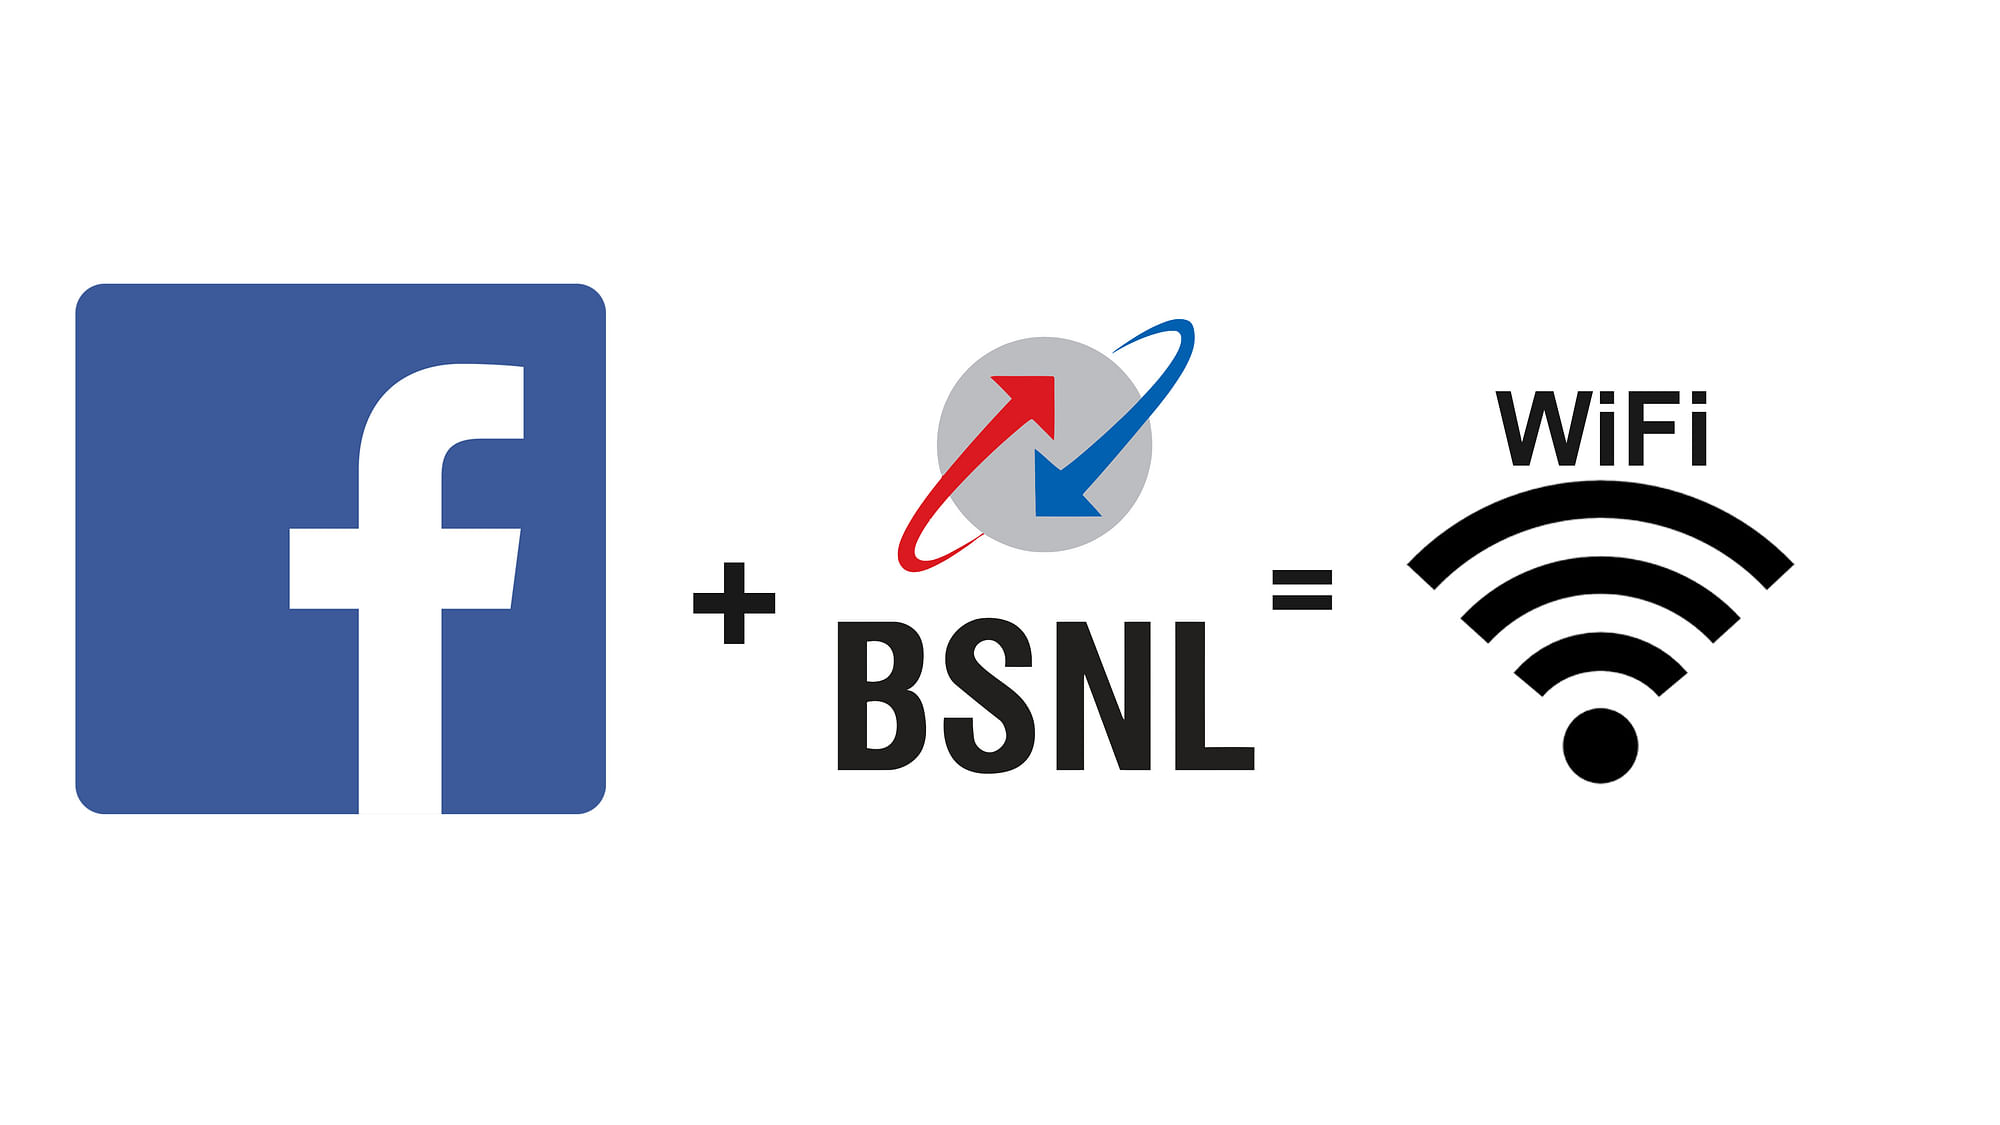 Facebook buys internet bandwidth from BSNL in India. (Photo: <b>The Quint</b>)